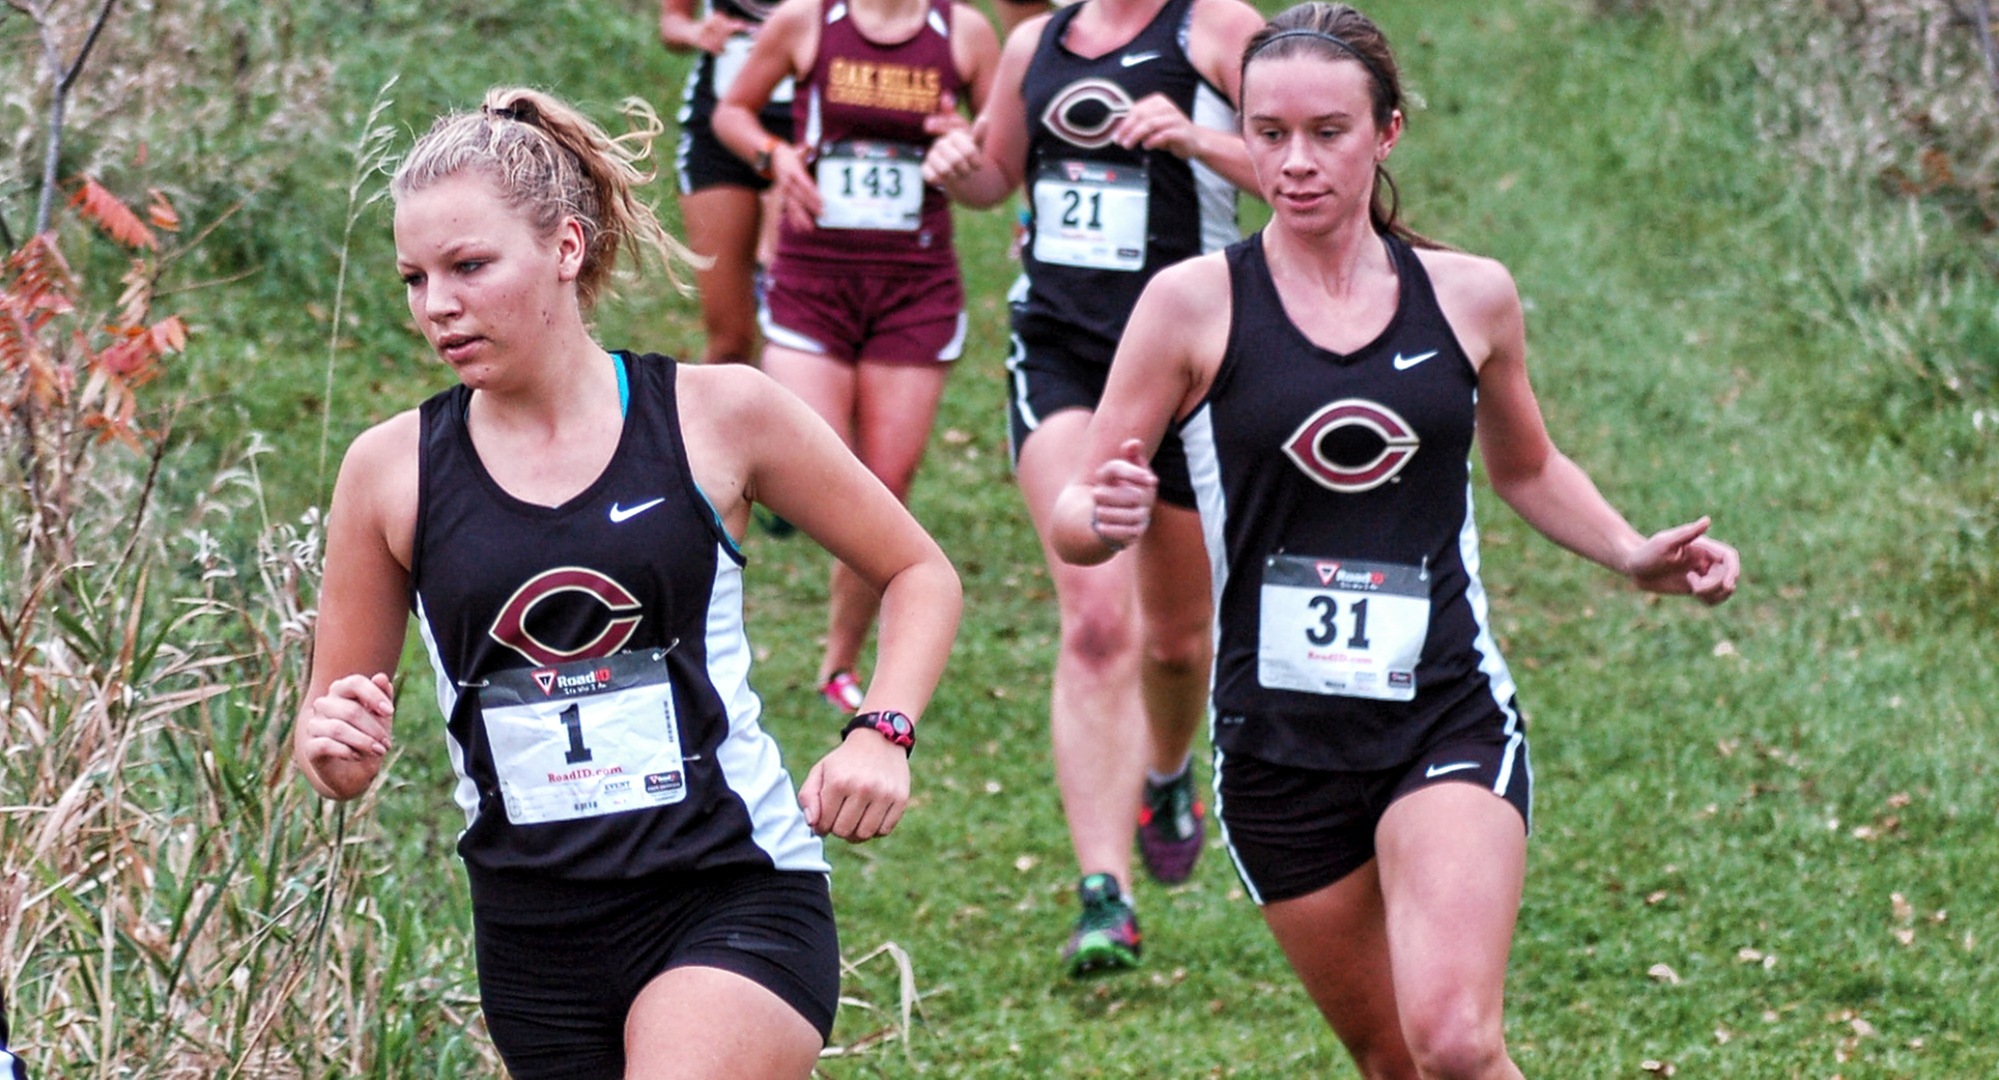 Kara Andersen (L) led Concordia at the St. Bonifacius Invite. She was one of six Cobbers to post a Top 20 finish.